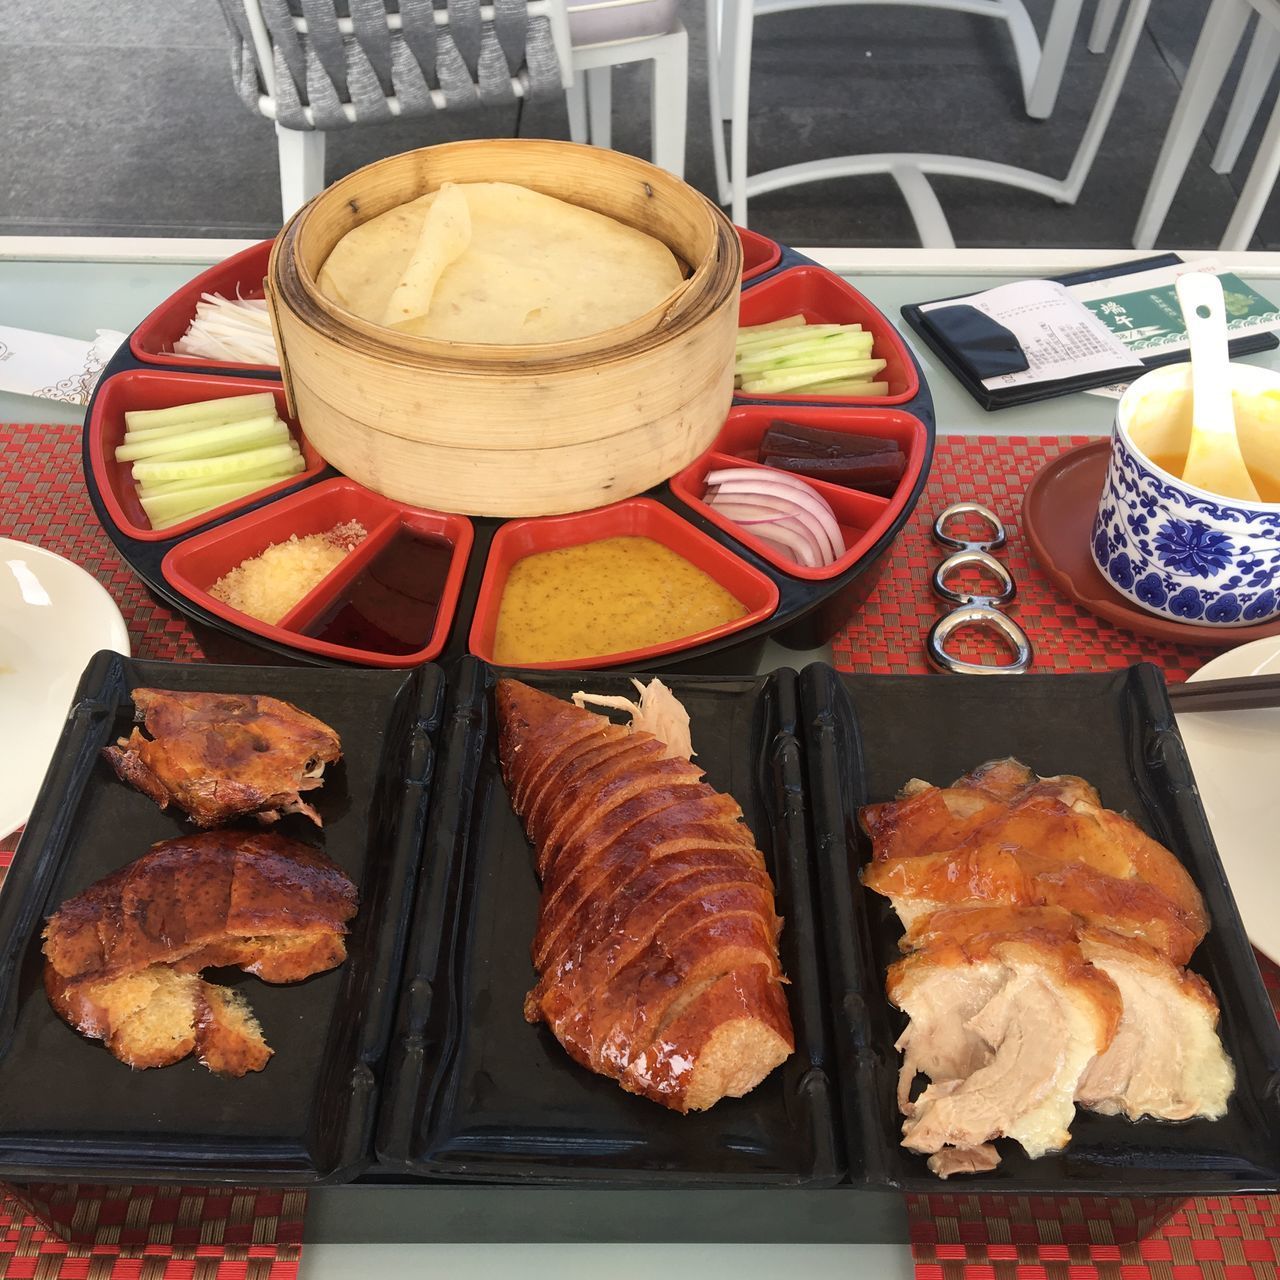 HIGH ANGLE VIEW OF MEAL SERVED IN TRAY